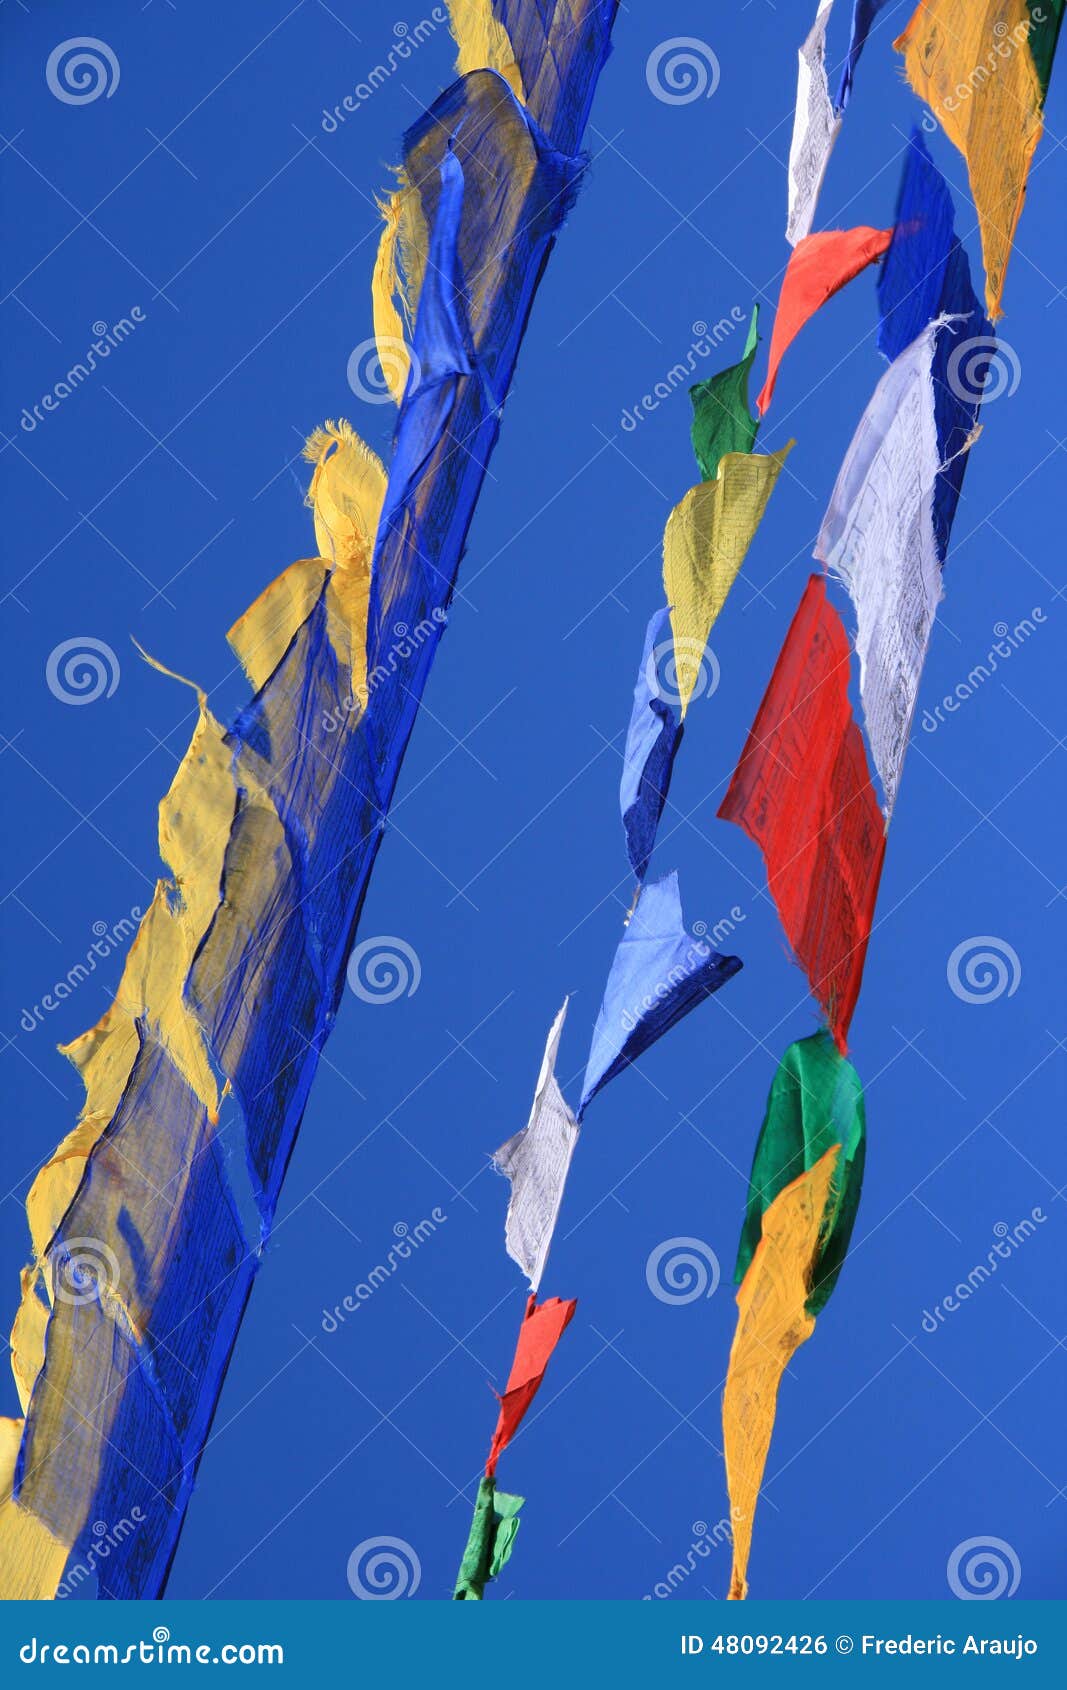 Prayer Flags are Floatting in the Sky in Bhutan Stock Photo